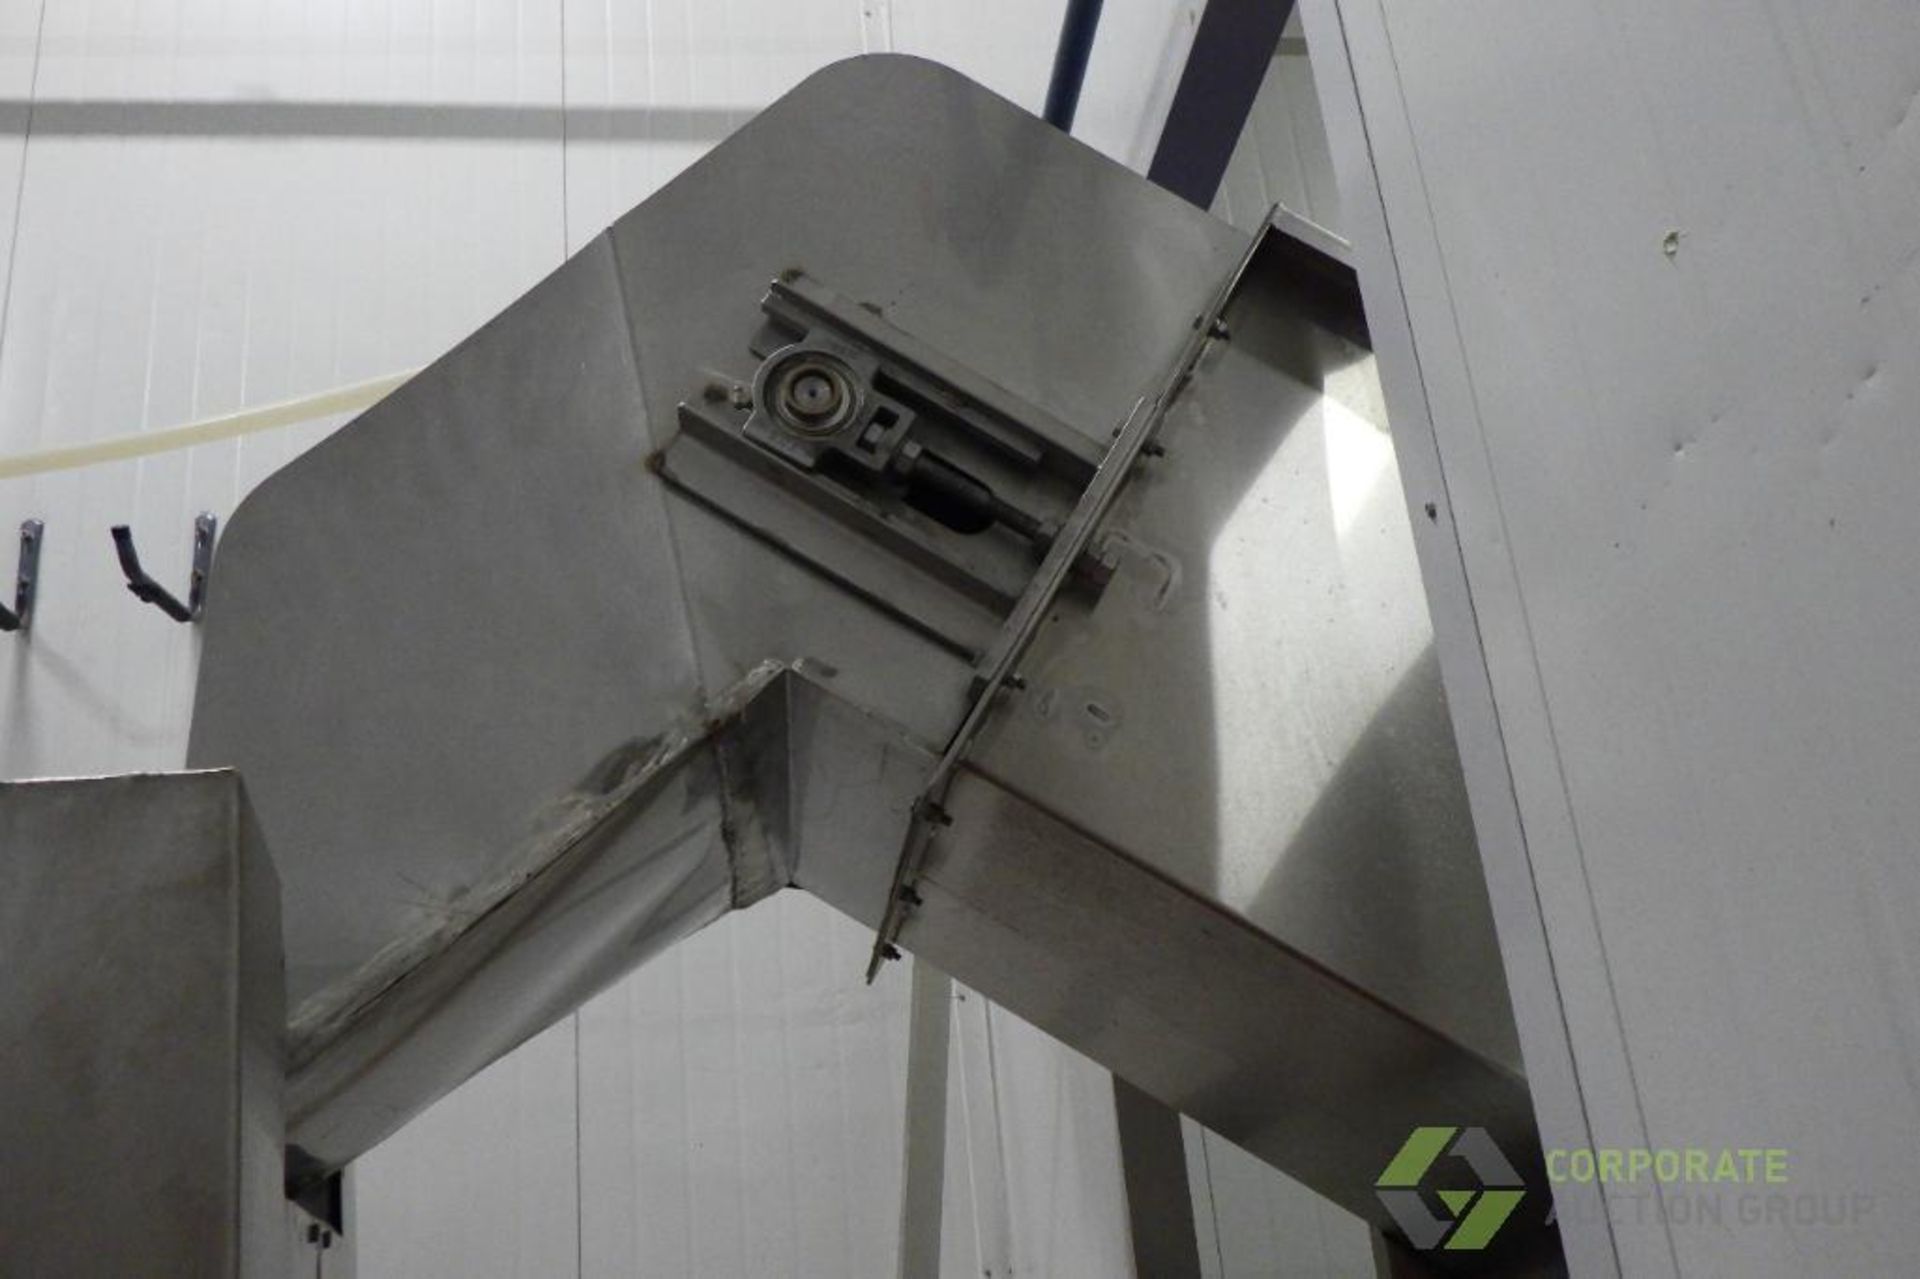 2019 Ten Brink Incline washing conveyor with SS hopper - Image 10 of 12